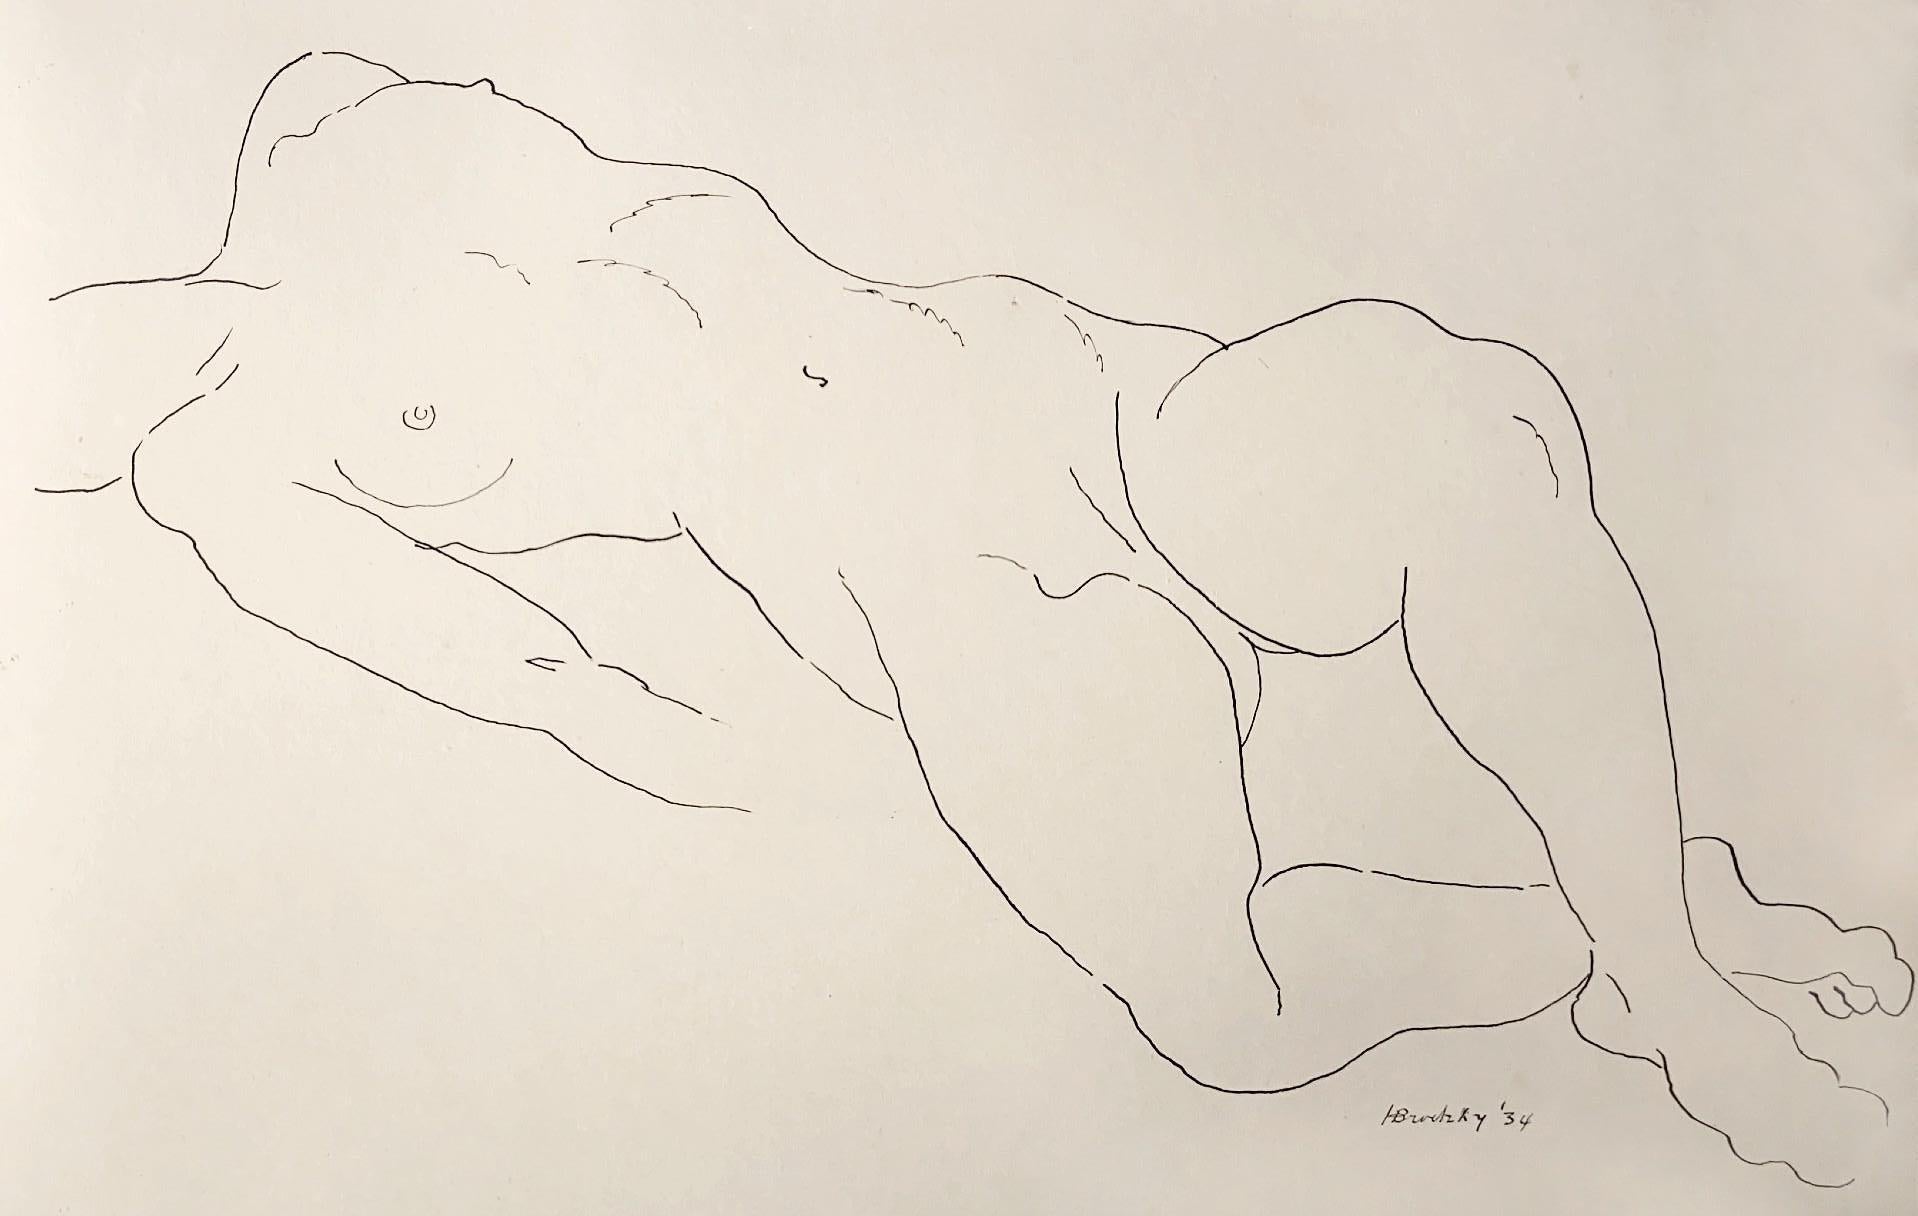 Essence of Line, Ink Nude Study, Early 20th Century Drawing, Signed and Dated - Art by Horace Brodsky